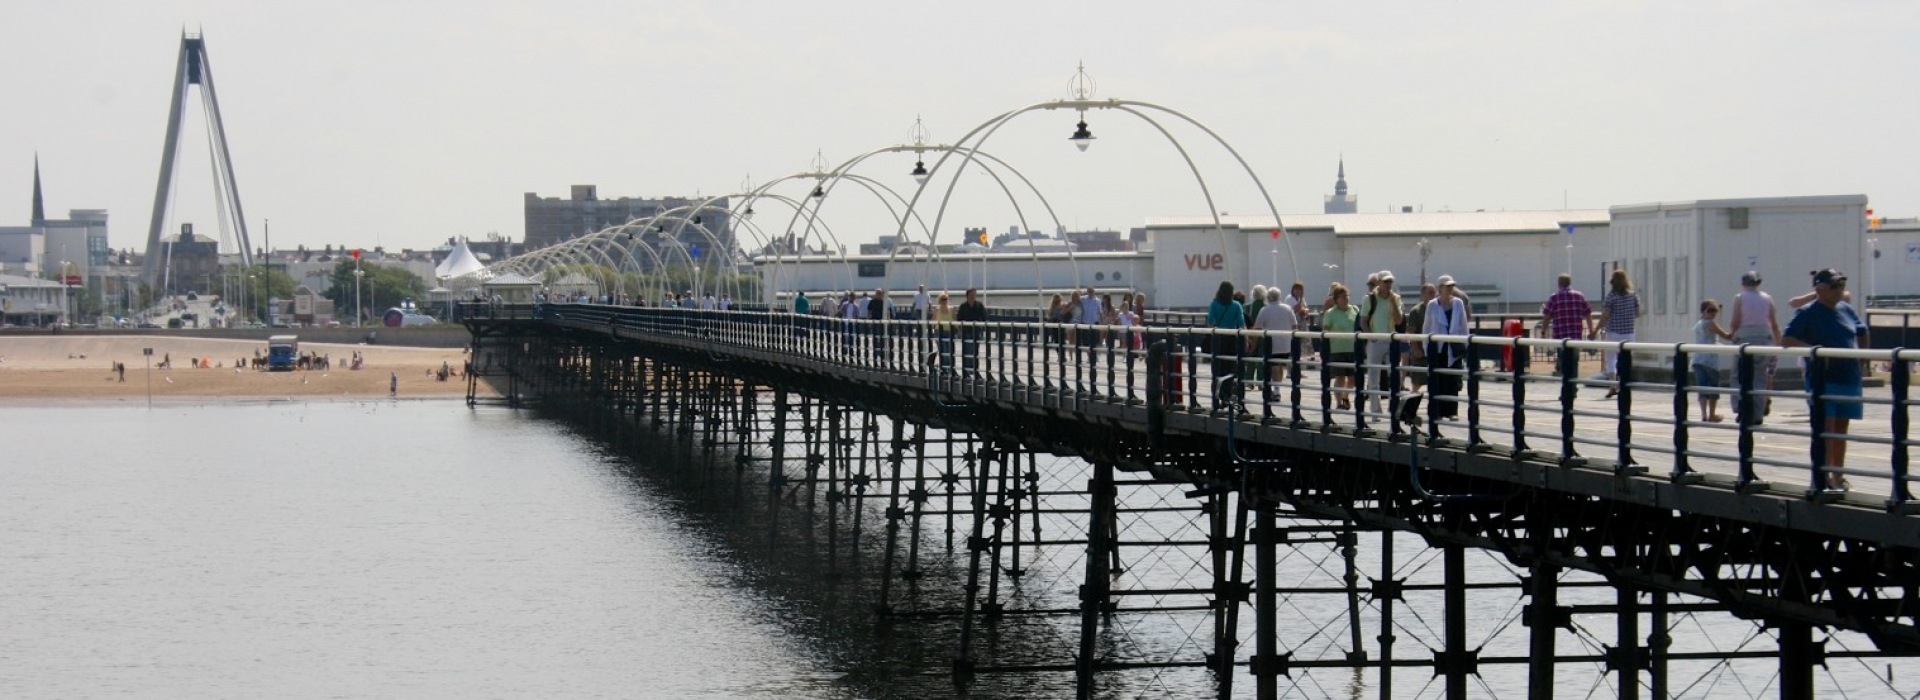 Taziker Industrial £2.9m revamp project at Southport Pier